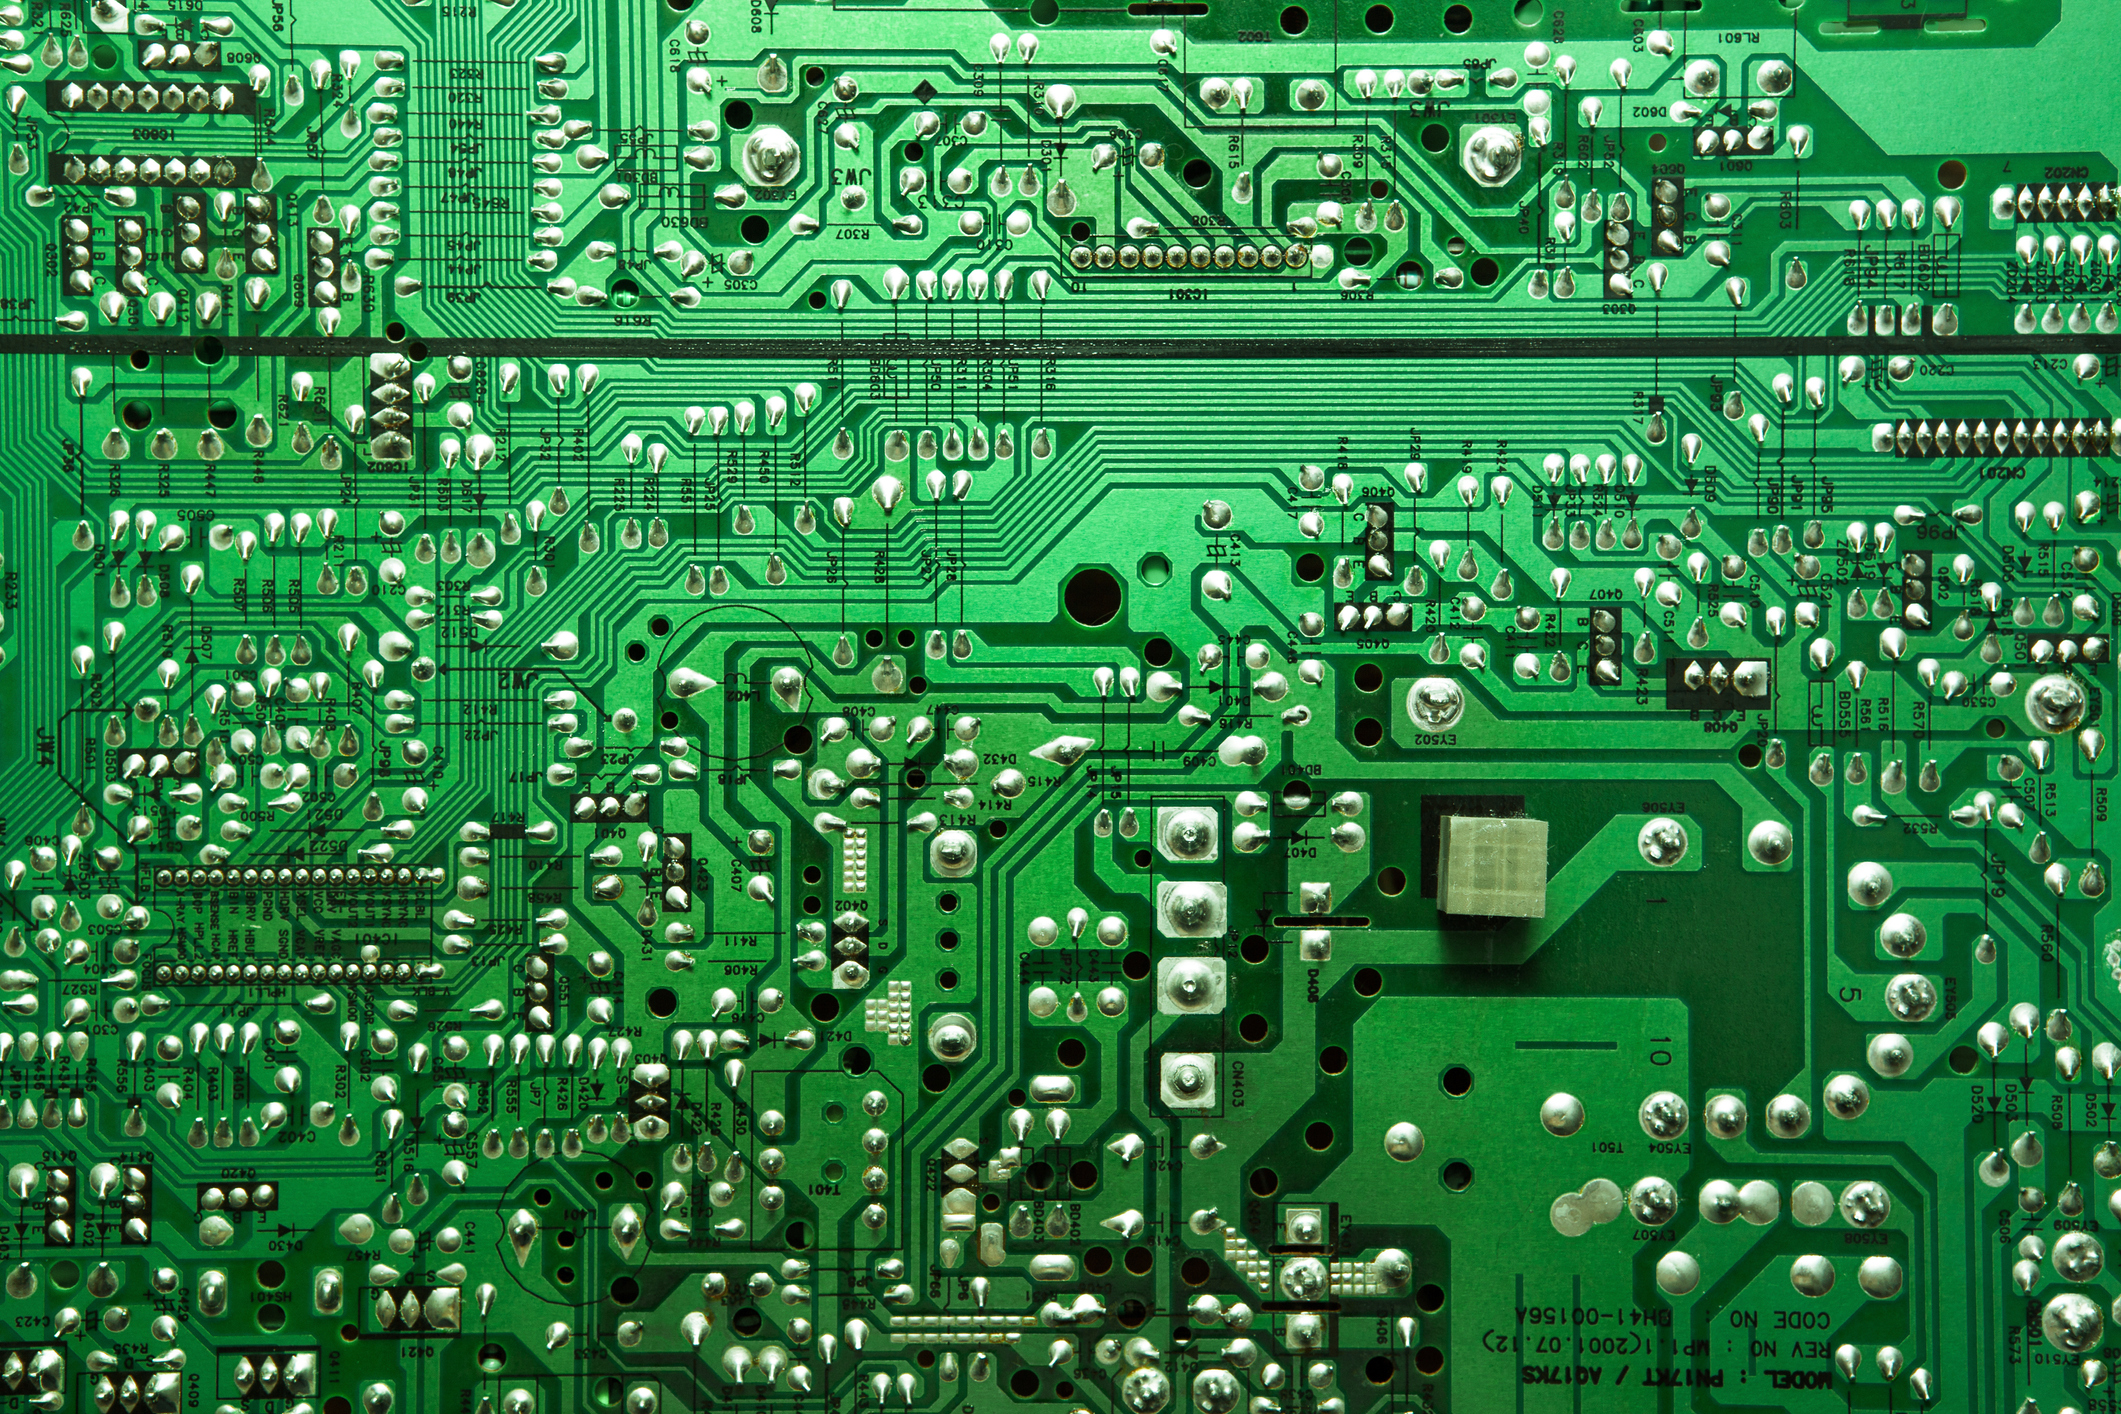 Macro shot of the back side of a circuit board